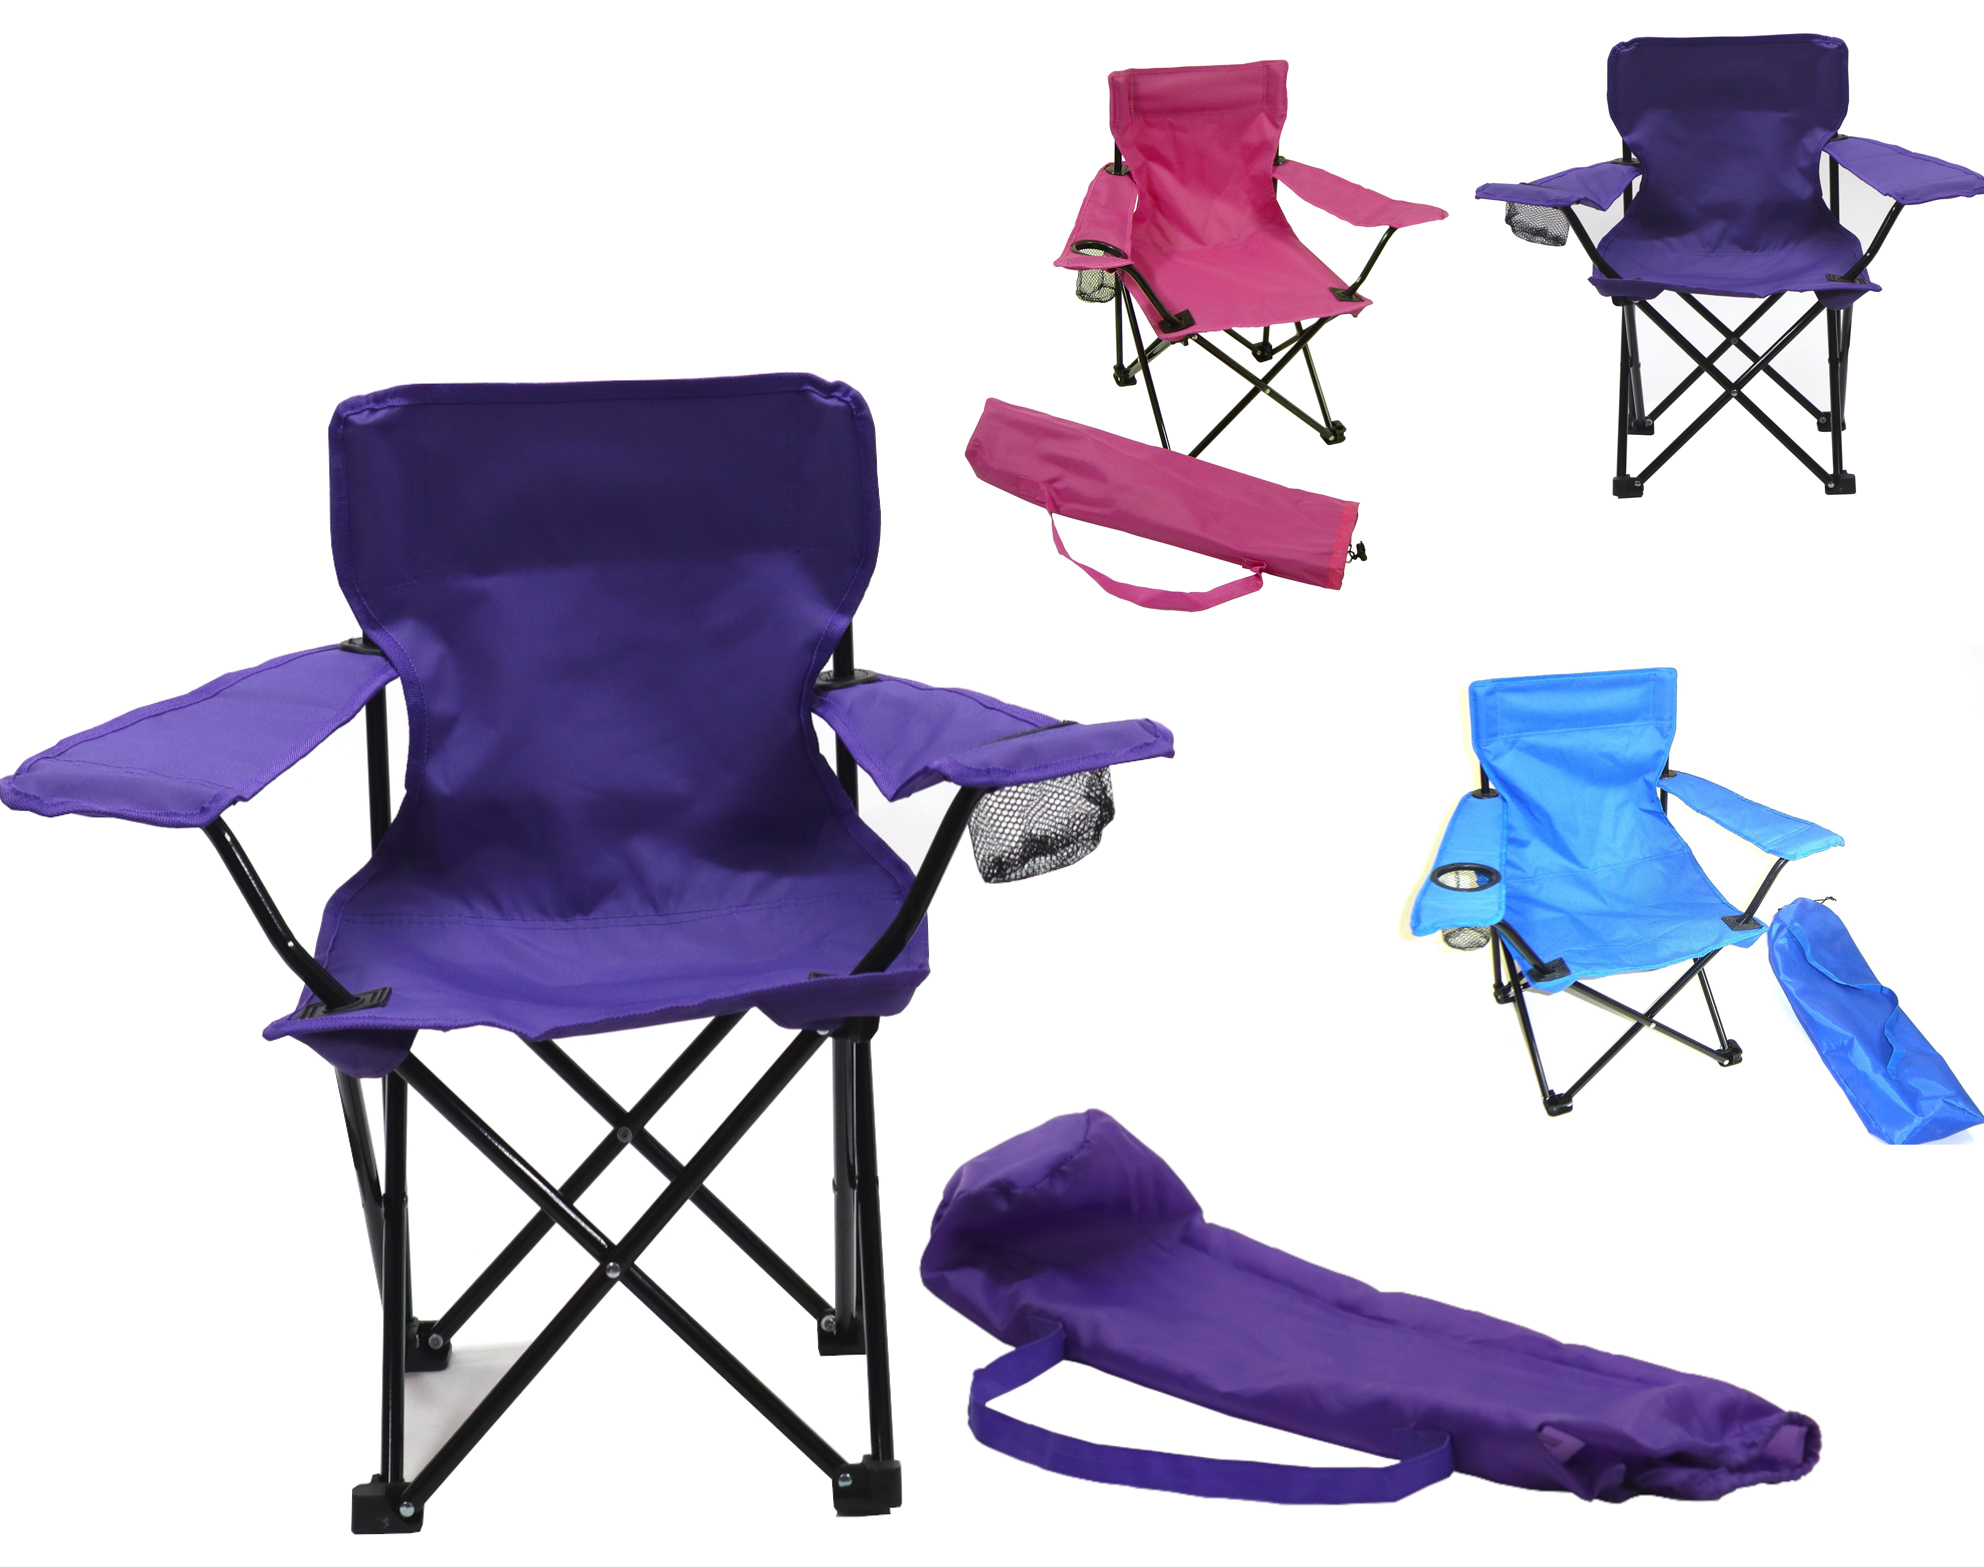 BEACH Baby Children's Folding Camp Chairs w/ Matching Tote BAG - Choose Your Color(s)